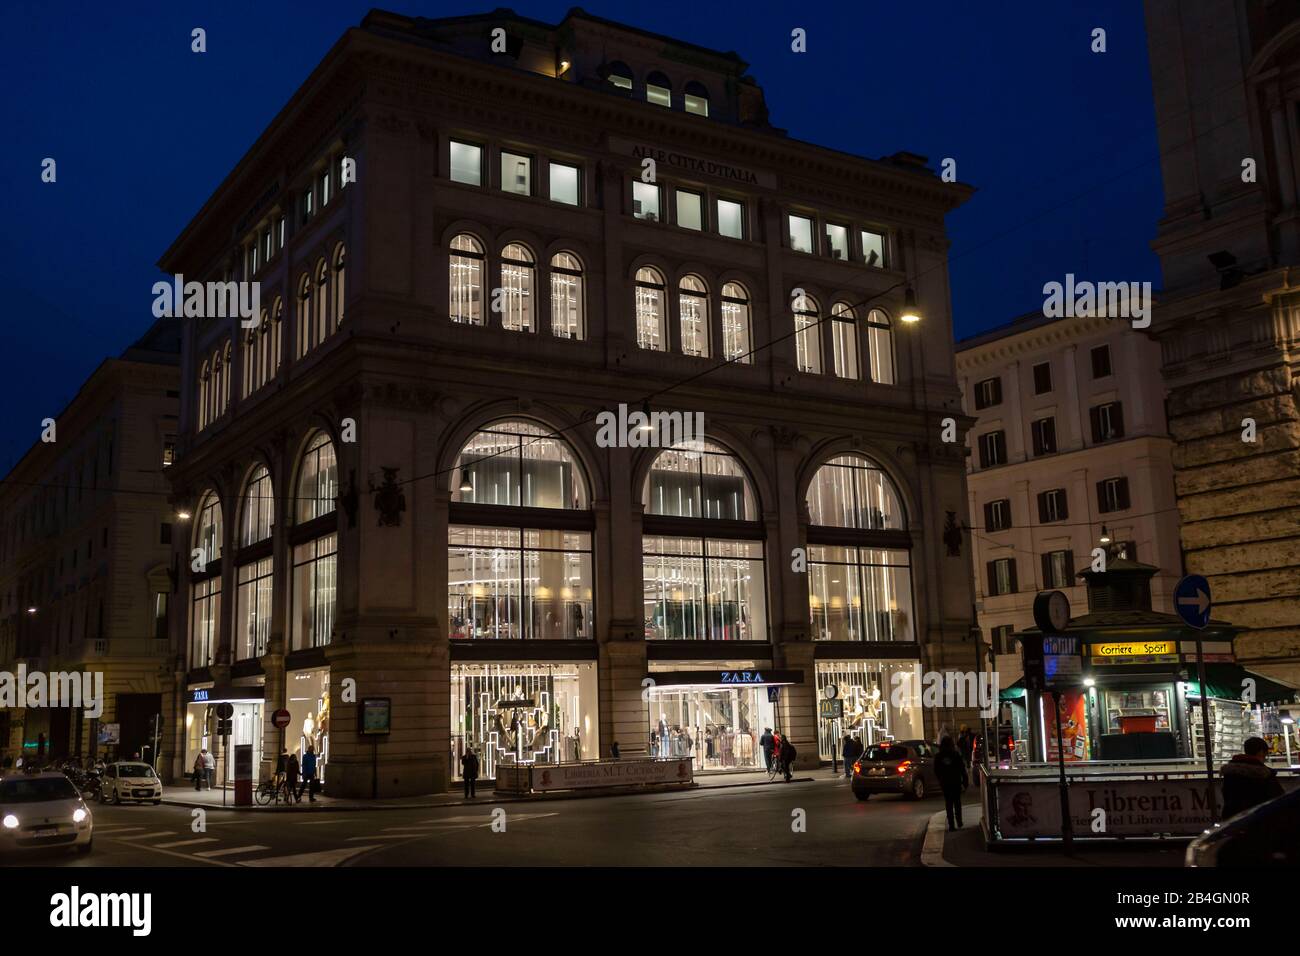 Store Rome High Resolution Stock Photography and Images - Alamy